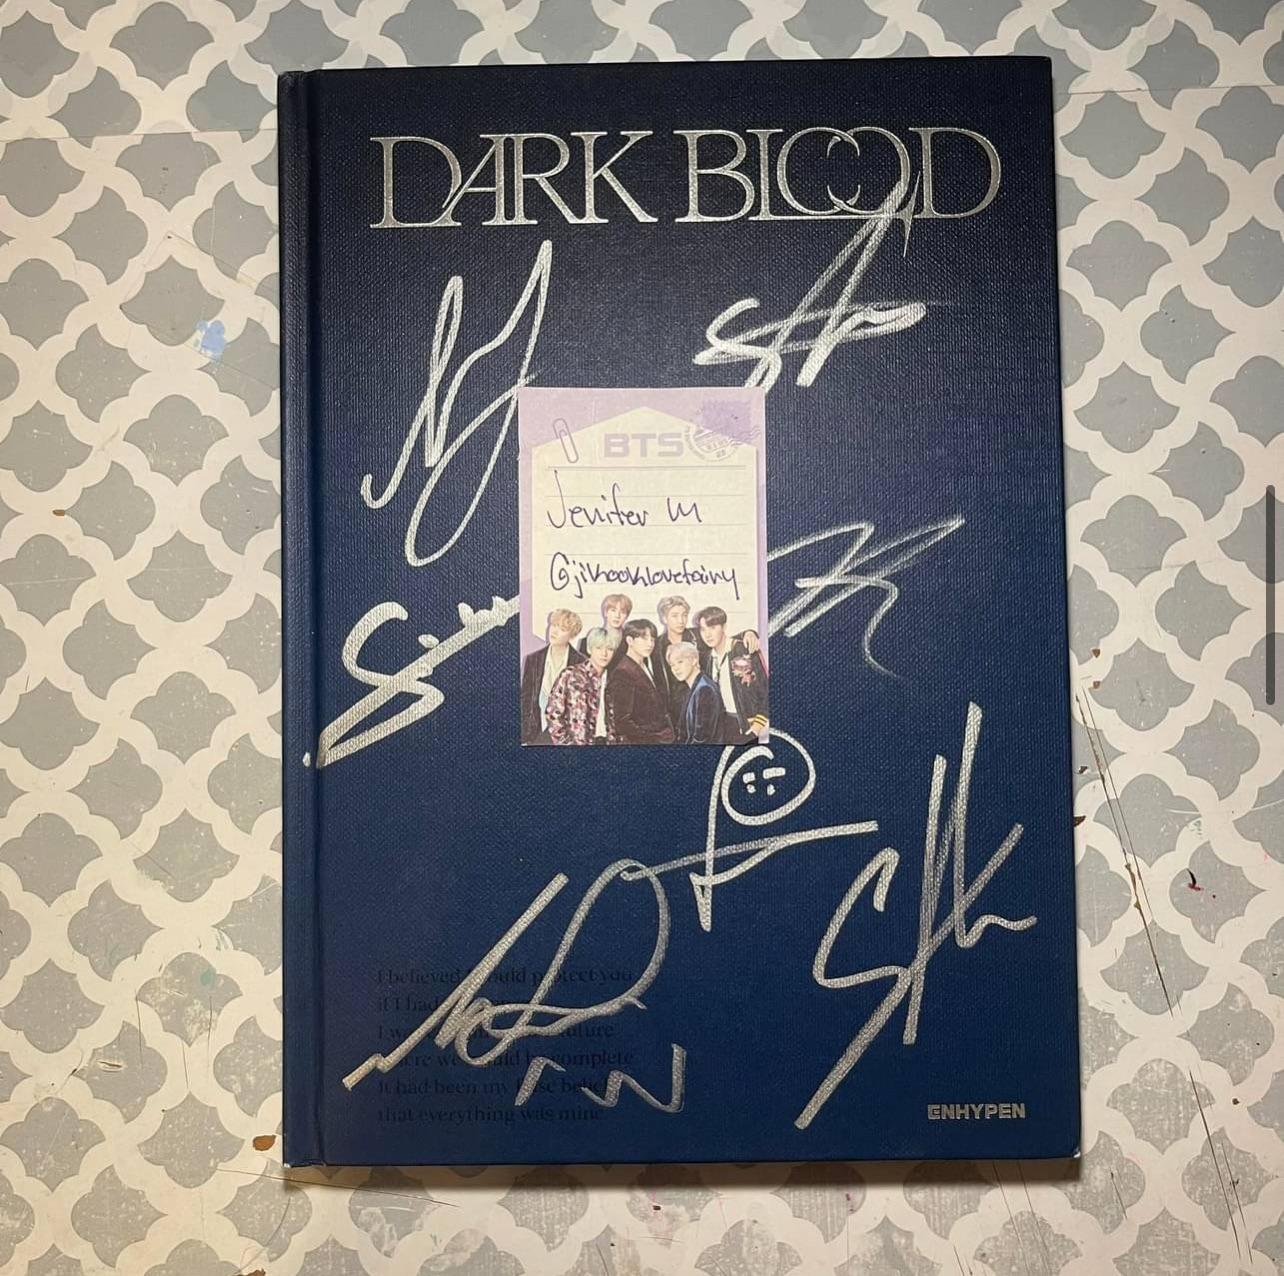 Does anyone know when/where these signed DARK BLOOD albums were sold?